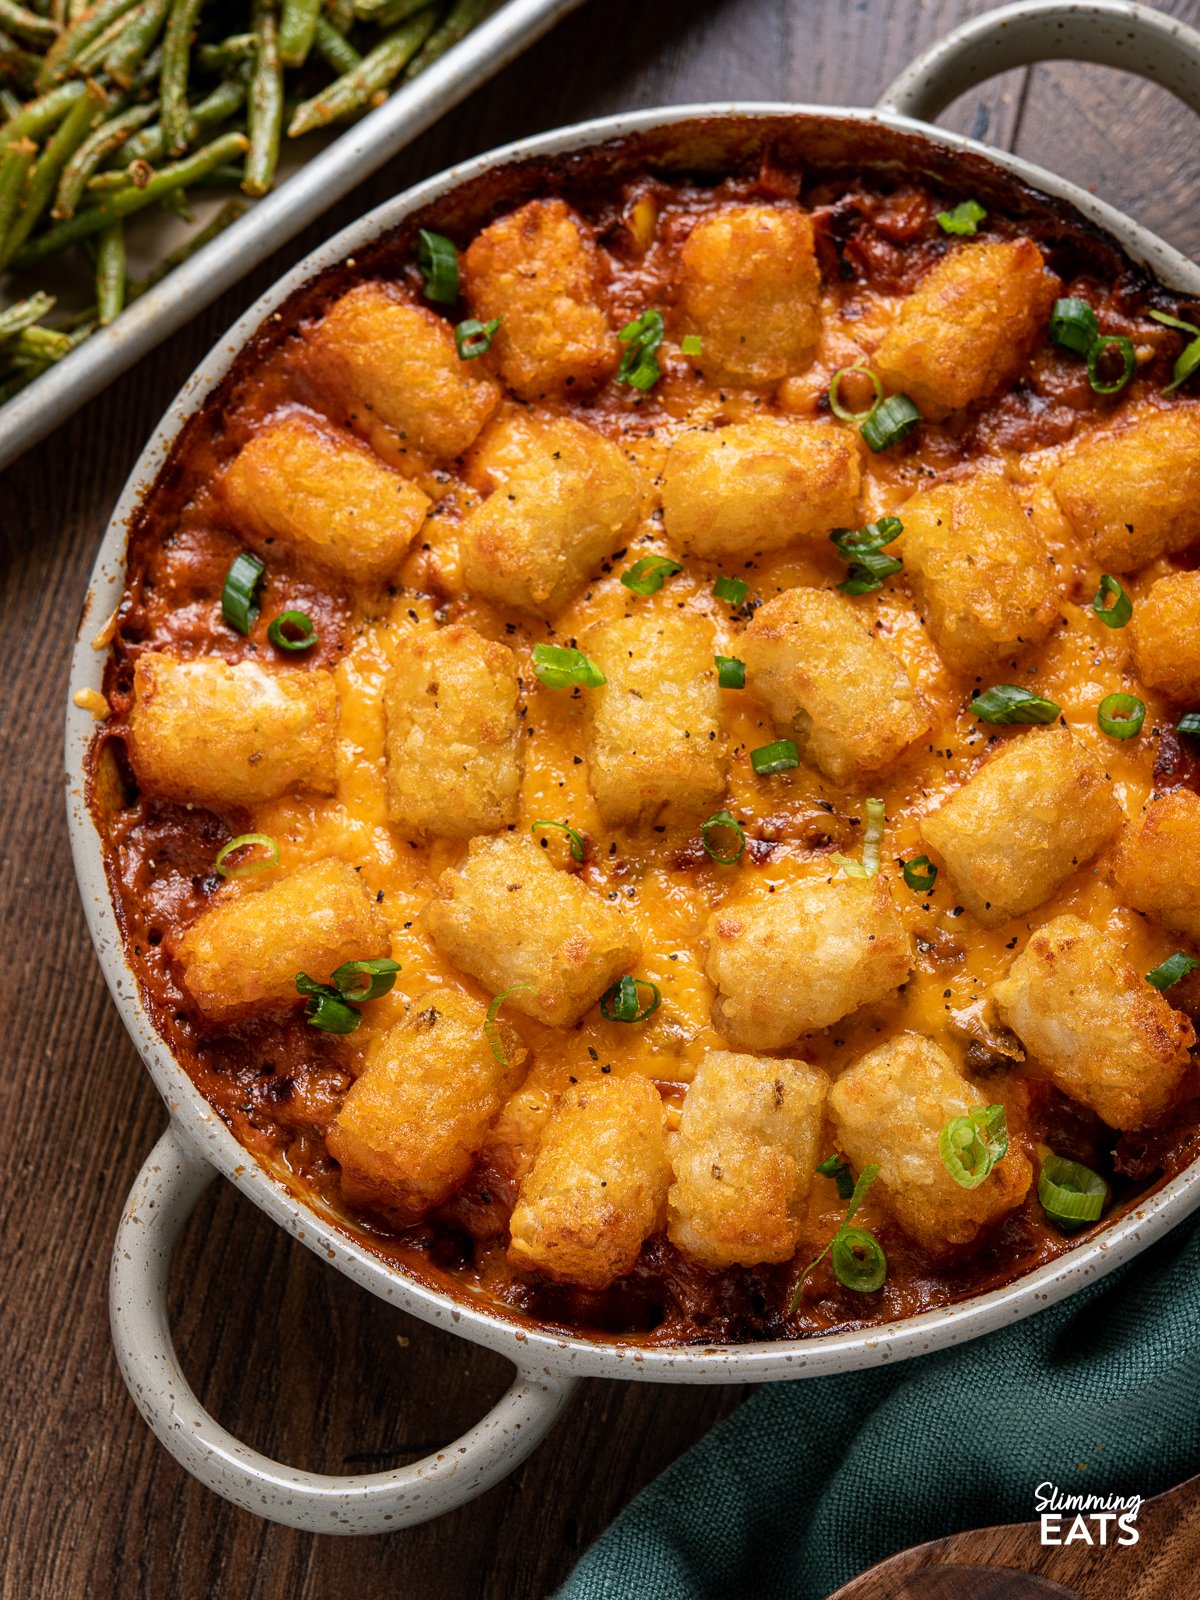 close up of Tater Tot Casserole in a round oven dish with two handles, tray of roasted green beans in the background